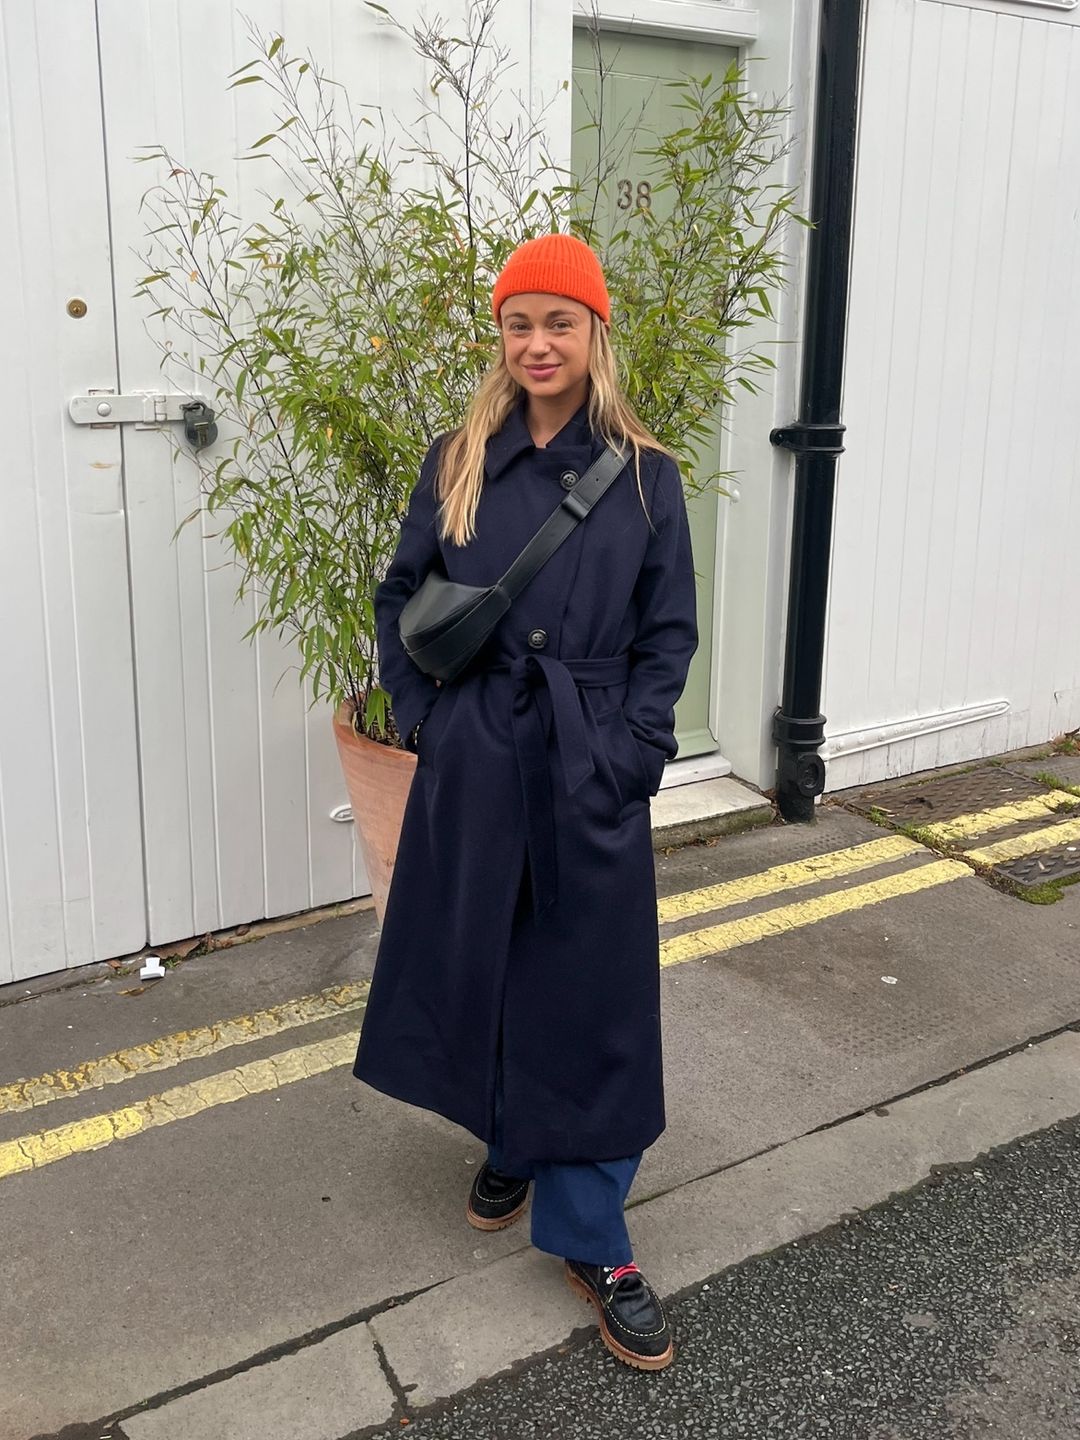 Amelia Windsor poses on the street in a navy trench coat, jeans, loafers and an orange beanie